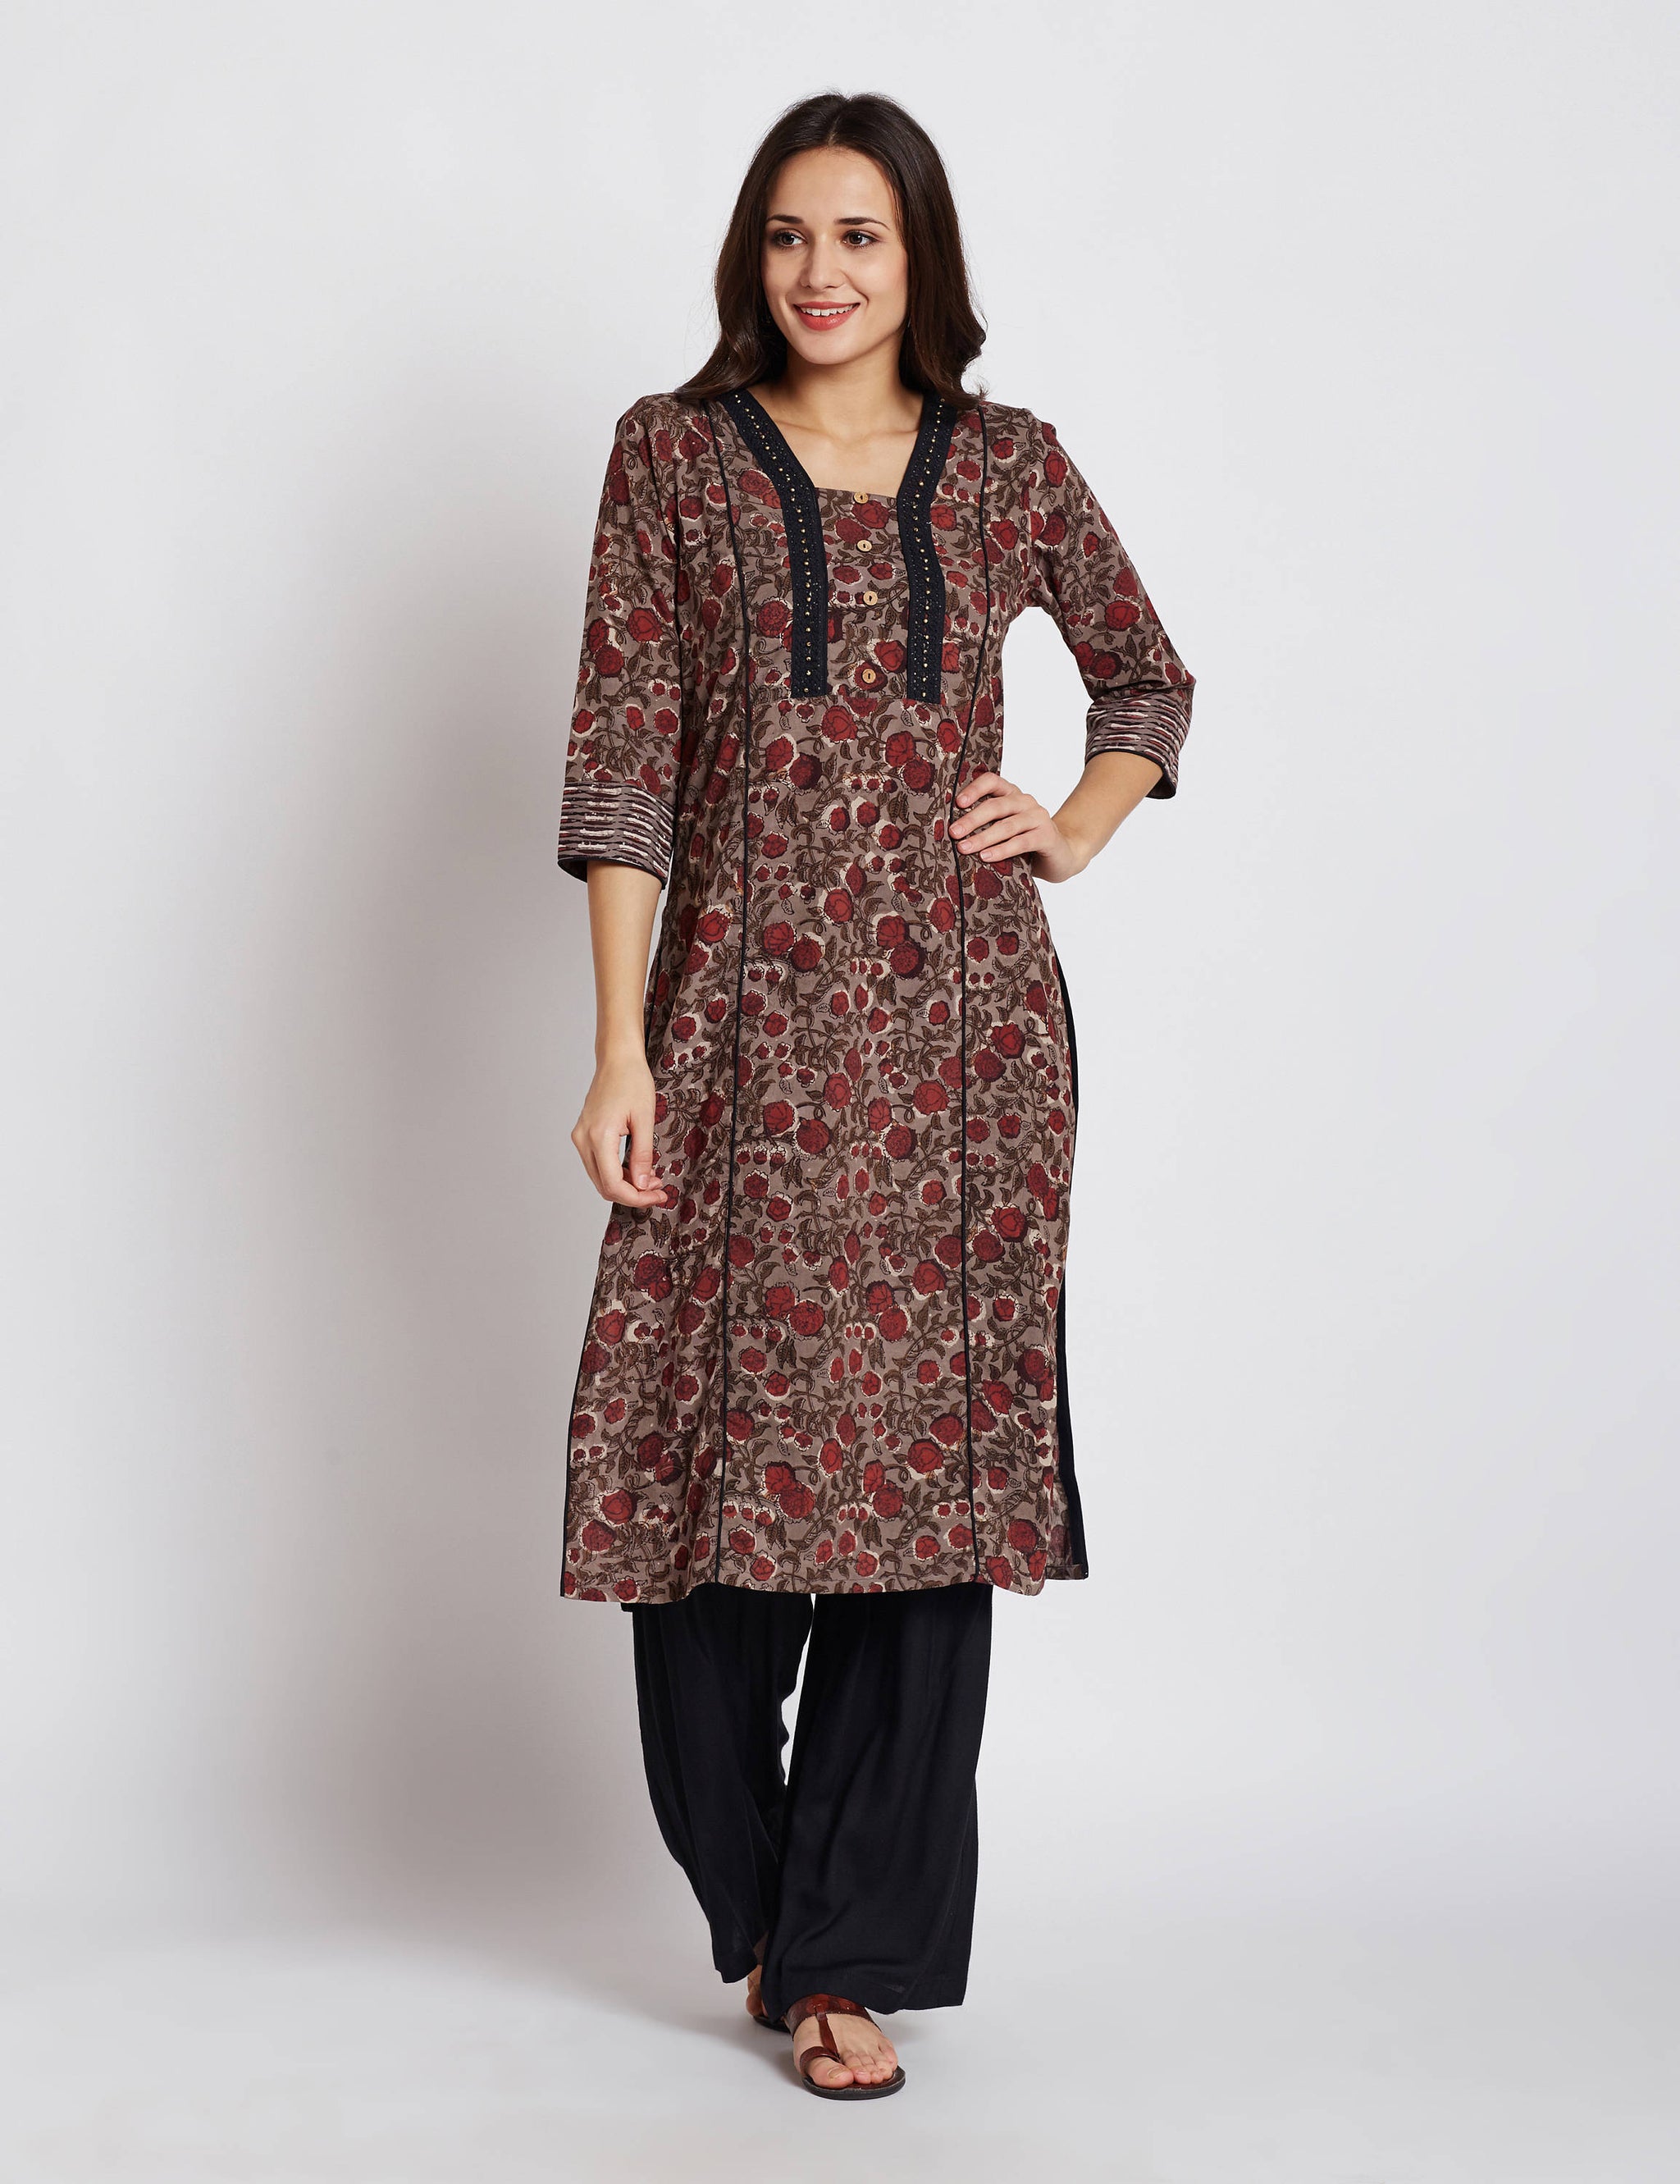 Bagh Print Abstract Print Kurtis Online Shopping for Women at Low Prices